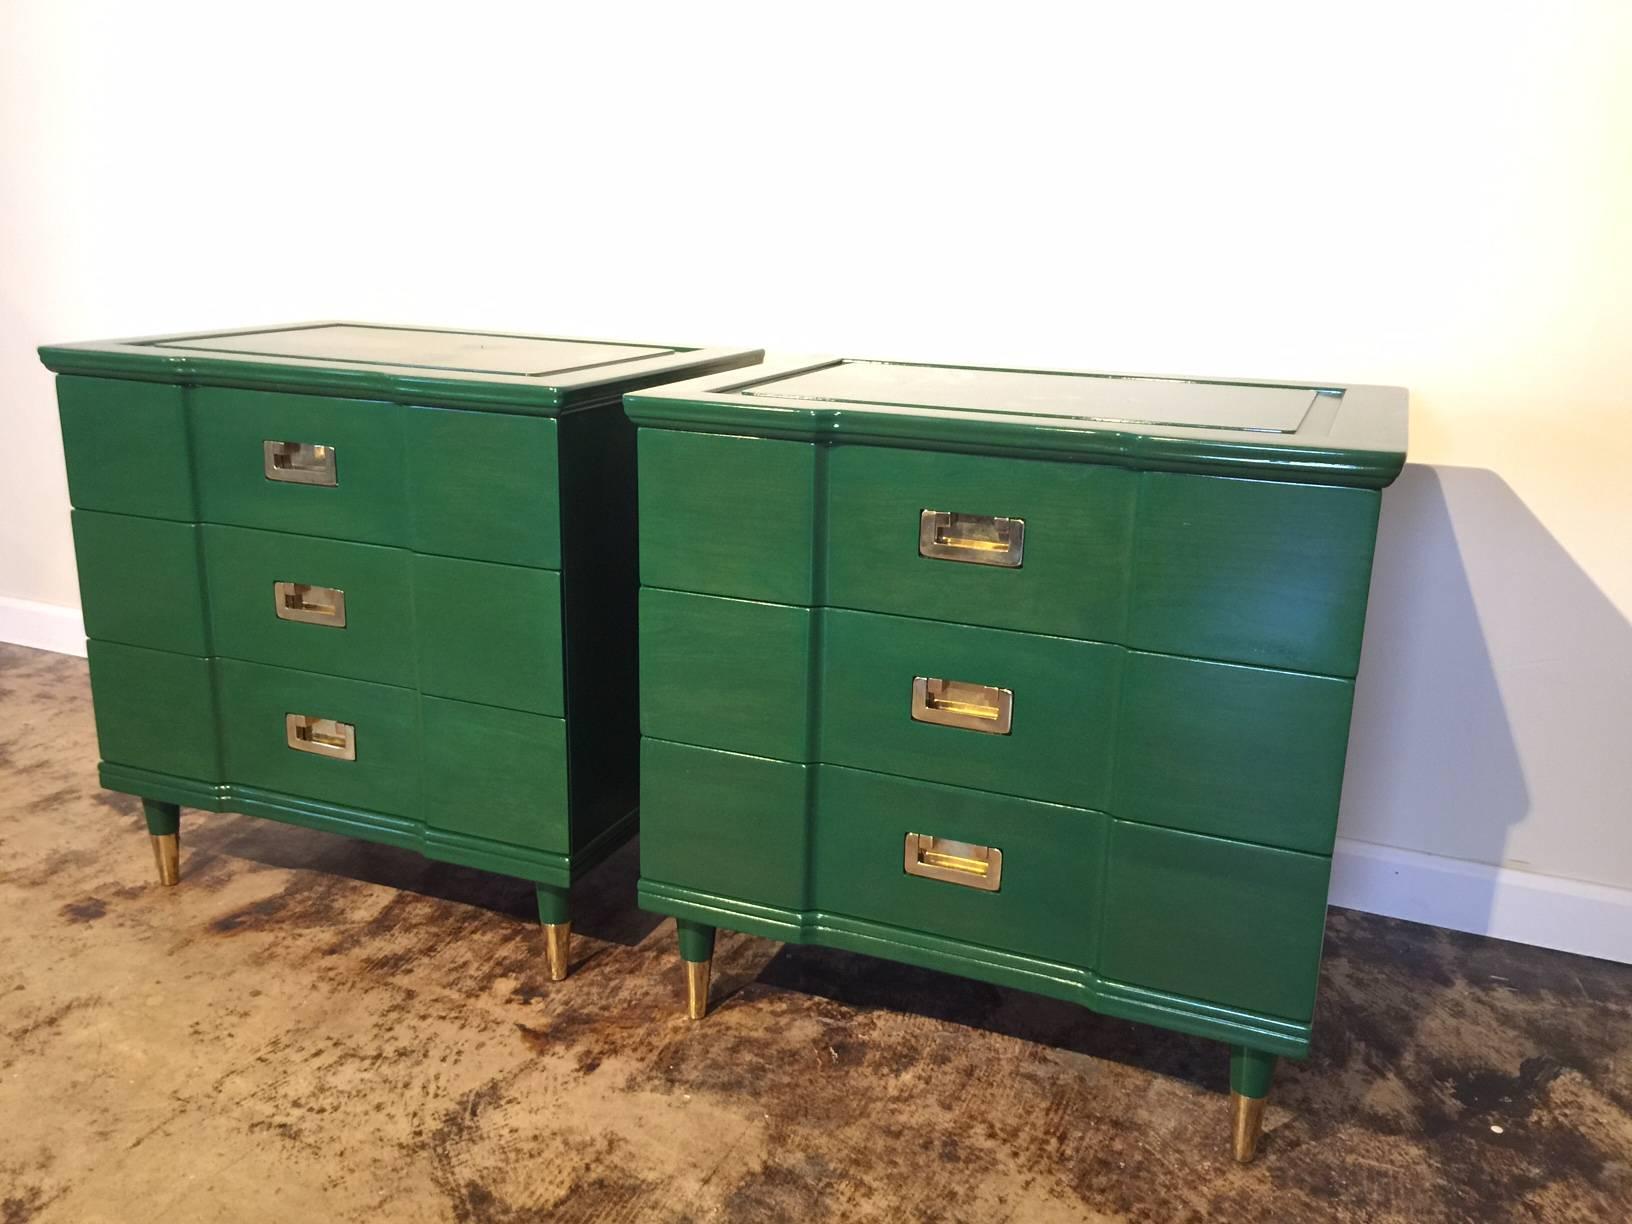 Stylish side tables or nightstands by John Widdicomb in Kelly green lacquered finish. Three ample drawers to each and polished brass original hardware, bonus of brass sabots to feet.